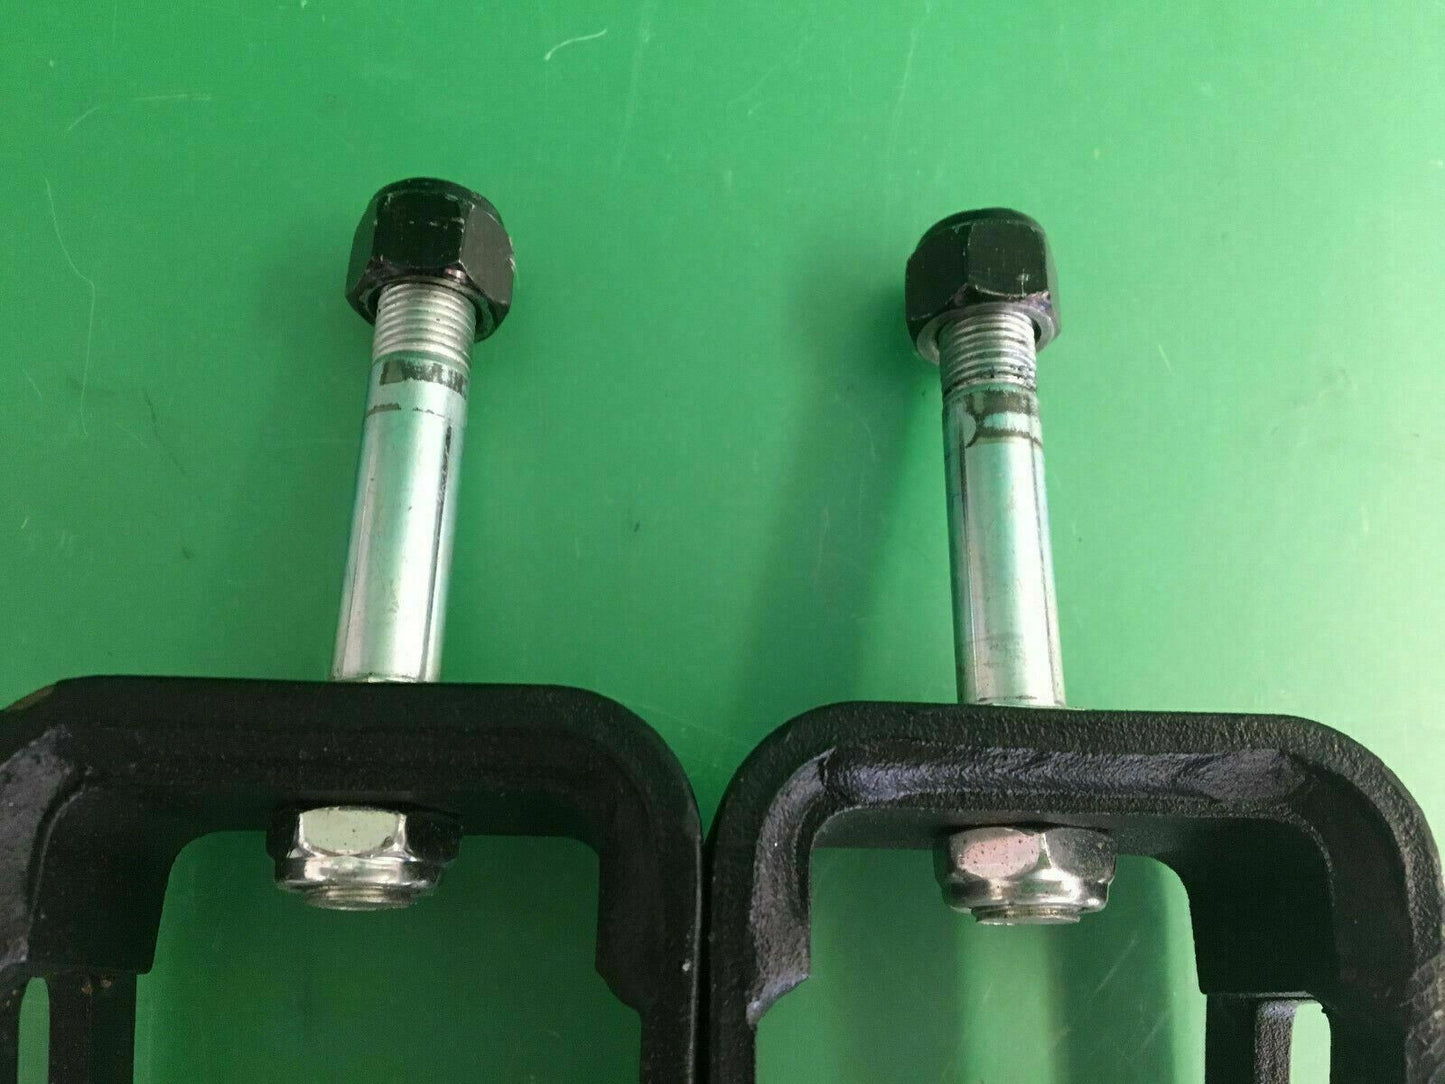 Rear Caster Forks for Pride Jazzy 1107 Power Wheelchair #D360